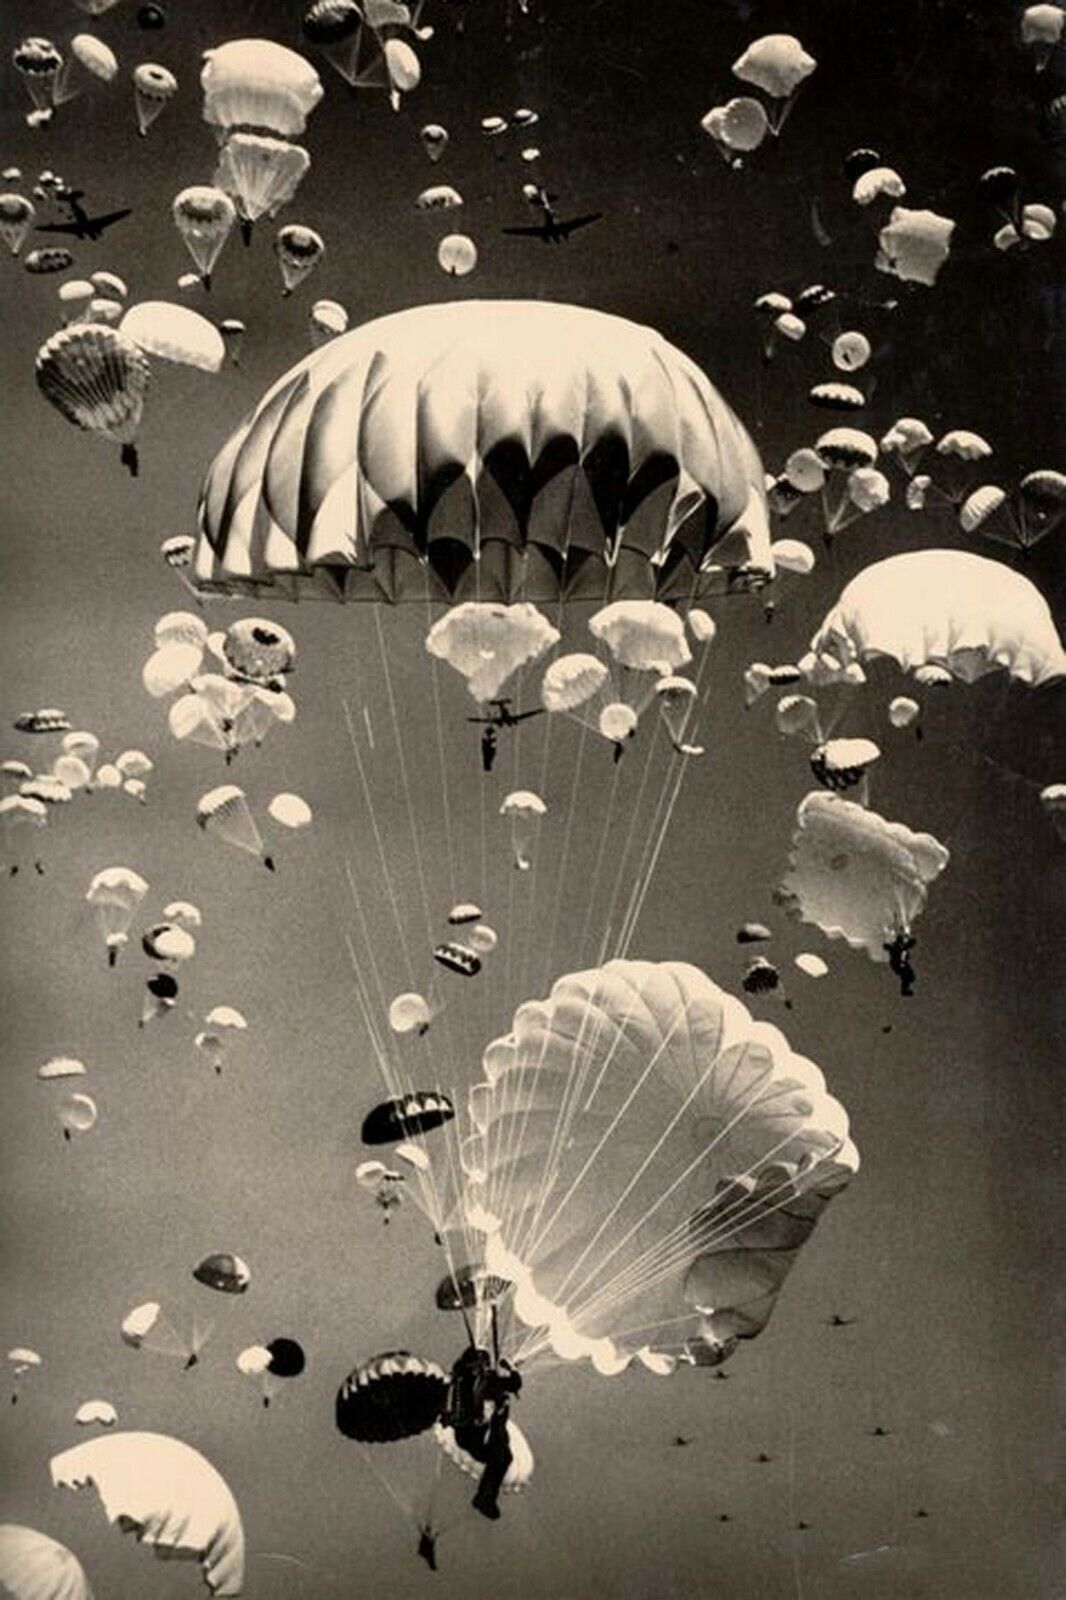 Paratroopers over Moscow, 1940’s. Yakov Rumkin WW2 Photo Glossy 4*6 in E021